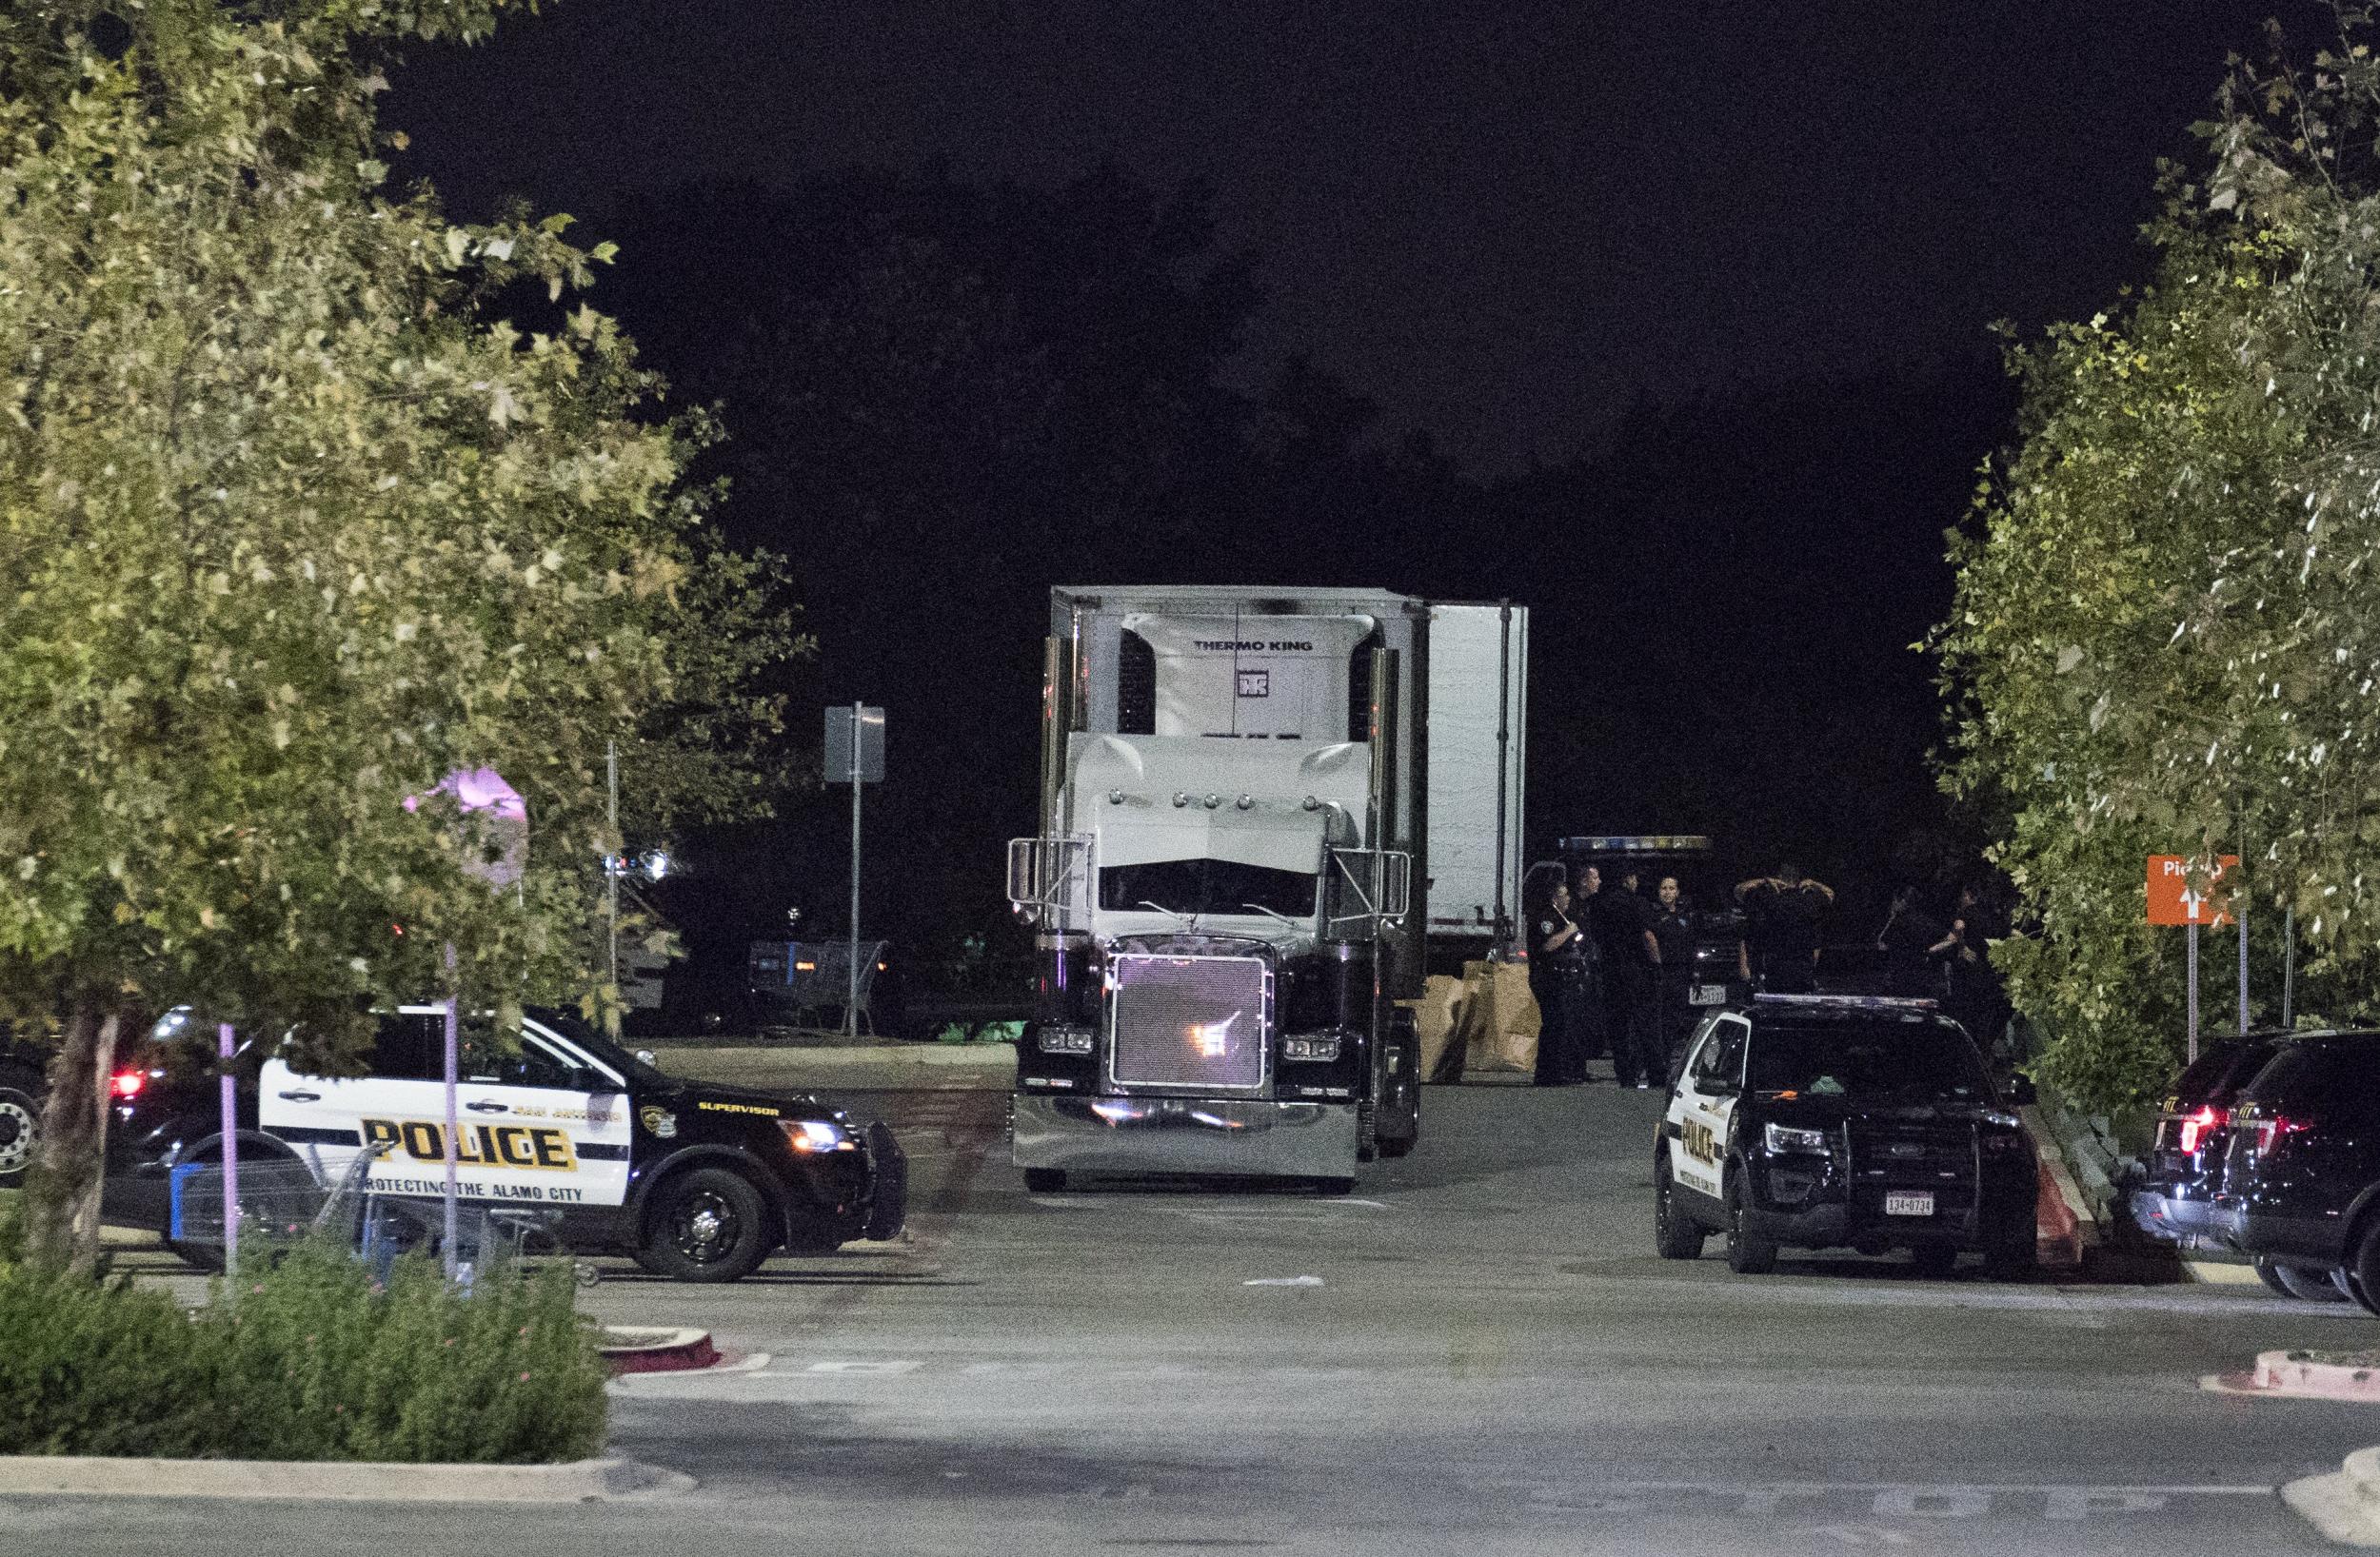 Officials investigate a truck that was found to contain 38 suspected illegal immigrants and eight dead bodies in San Antonio